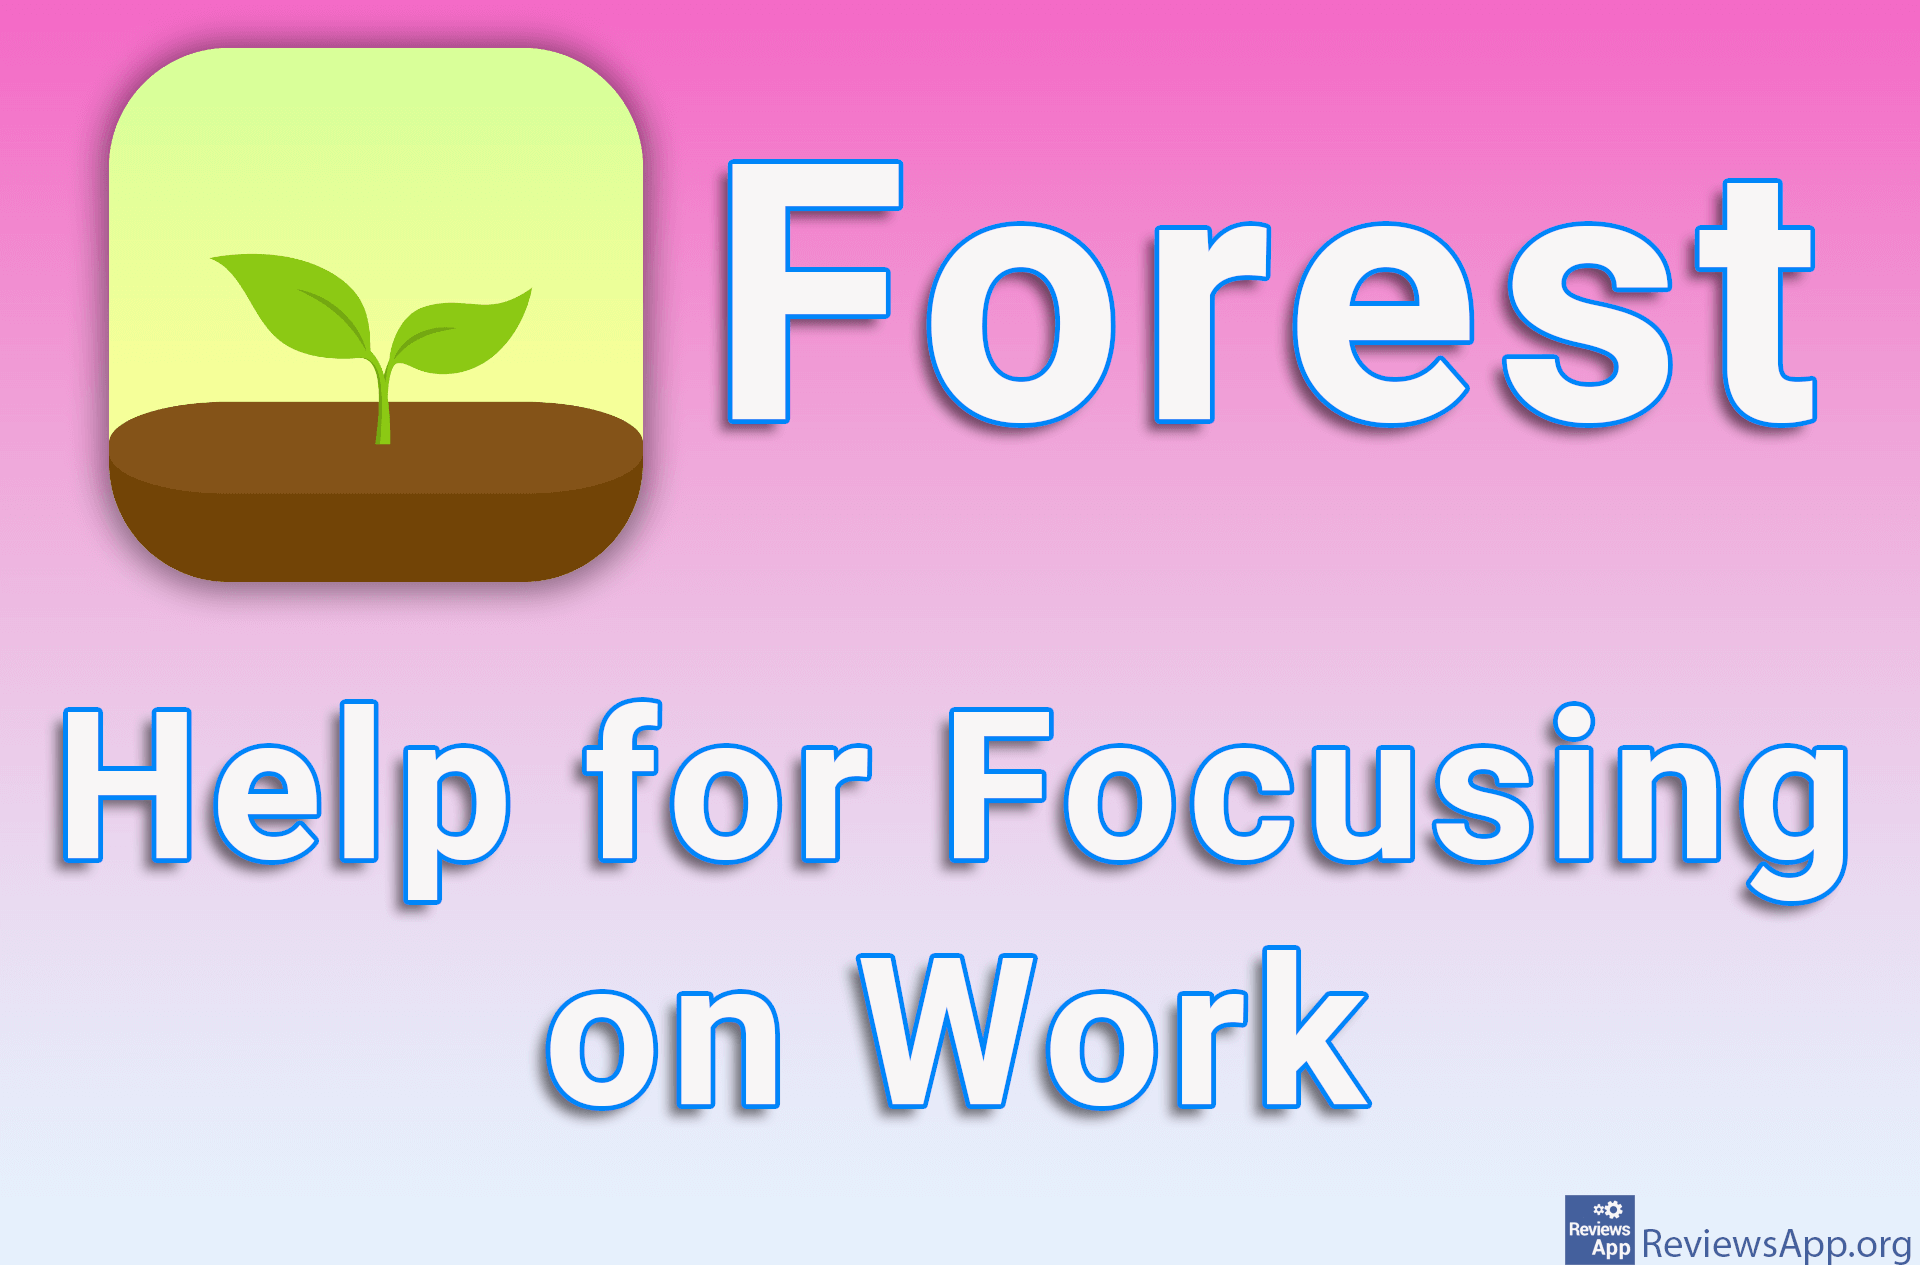 Forest – Help for Focusing on Work